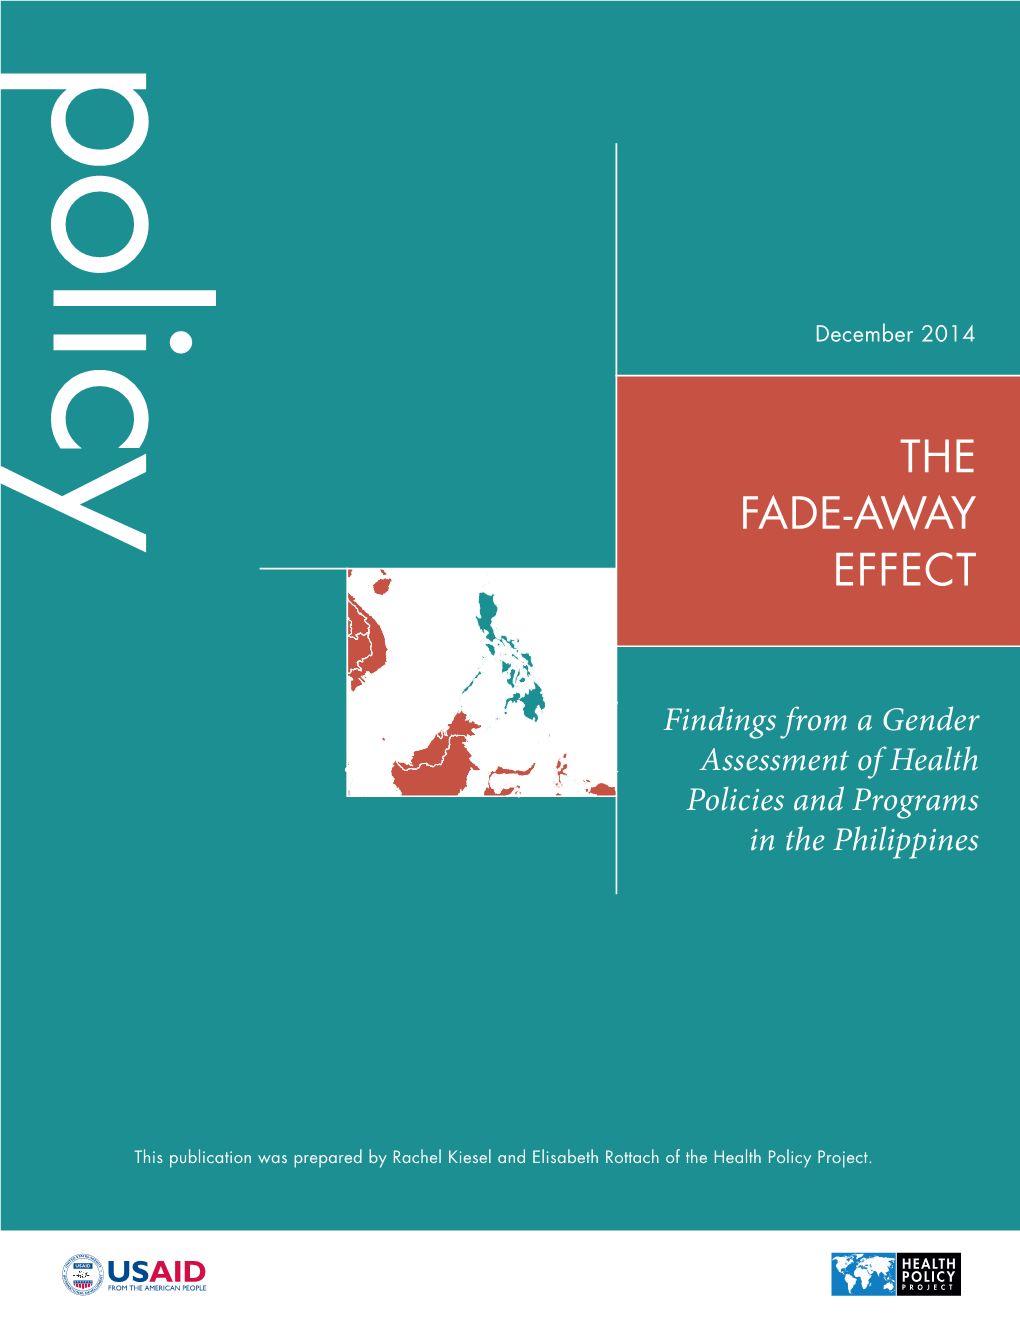 The Fade-Away Effect: Findings from a Gender Assessment of Health Policies and Programs in the Philippines